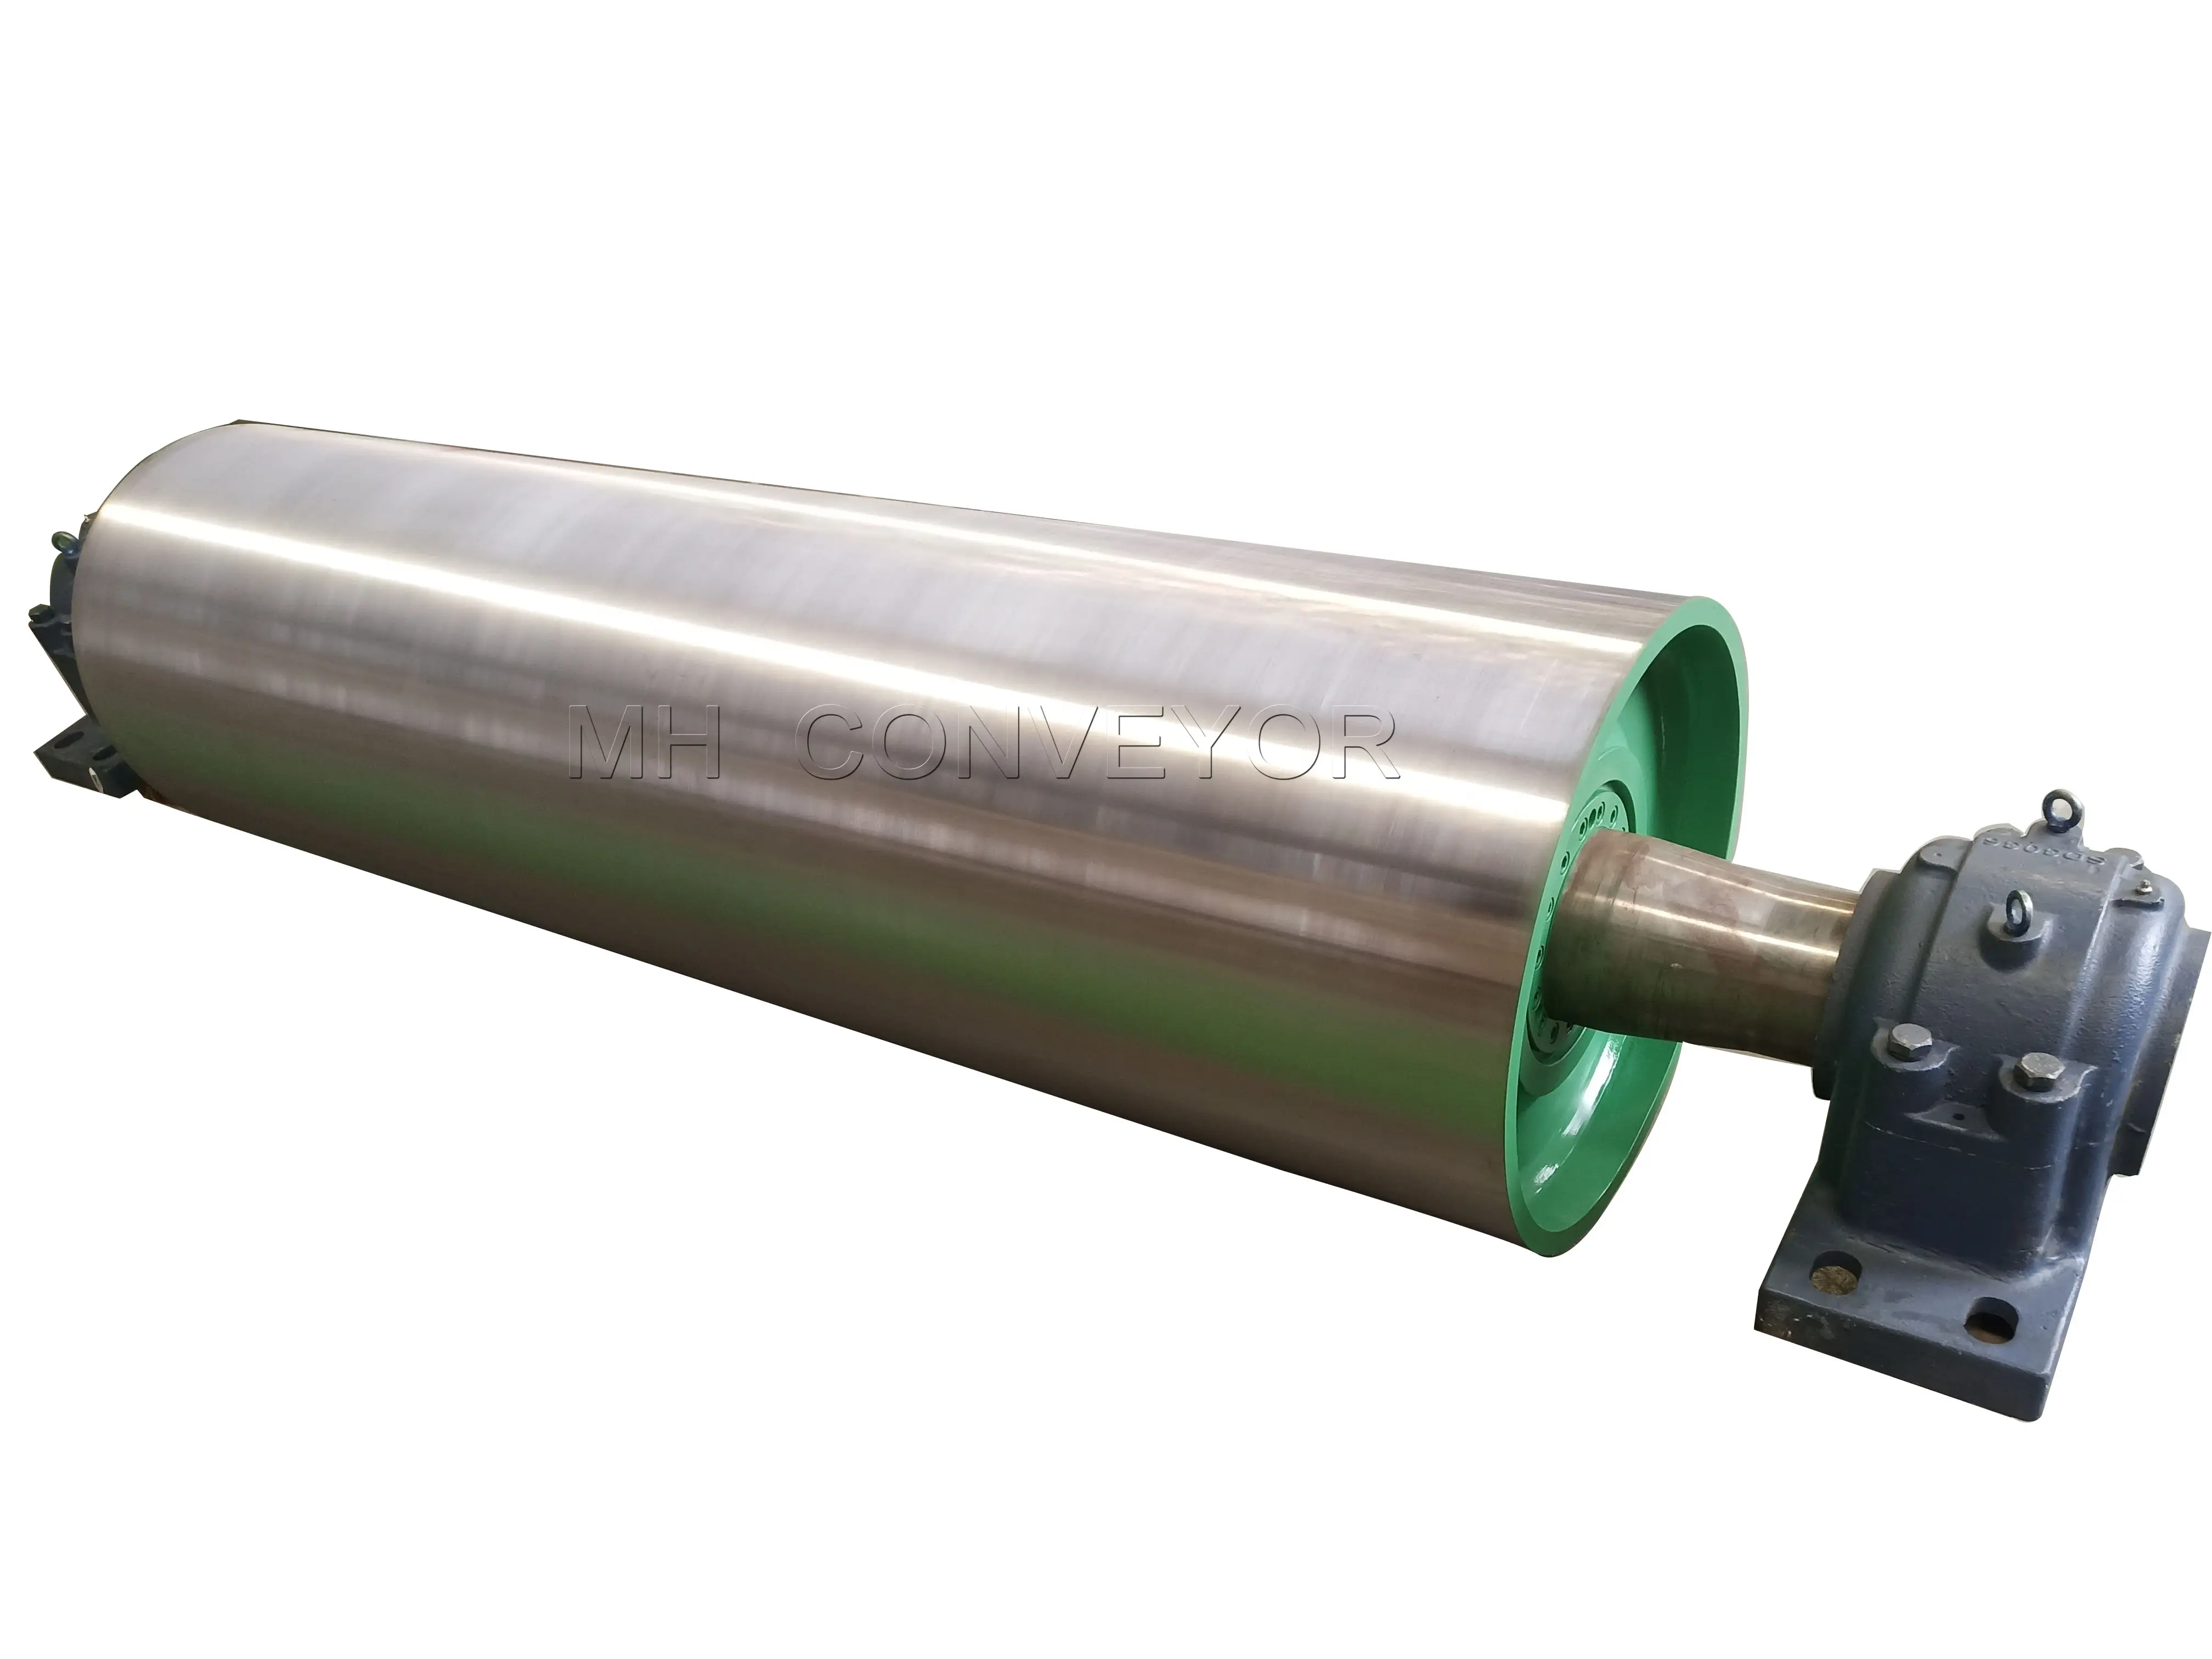 Manufacture Heavy Industrial Belt Conveyor Pulley Drive Roller Provided Carbon Steel Hot Product 2023 Customized Size 500 MH